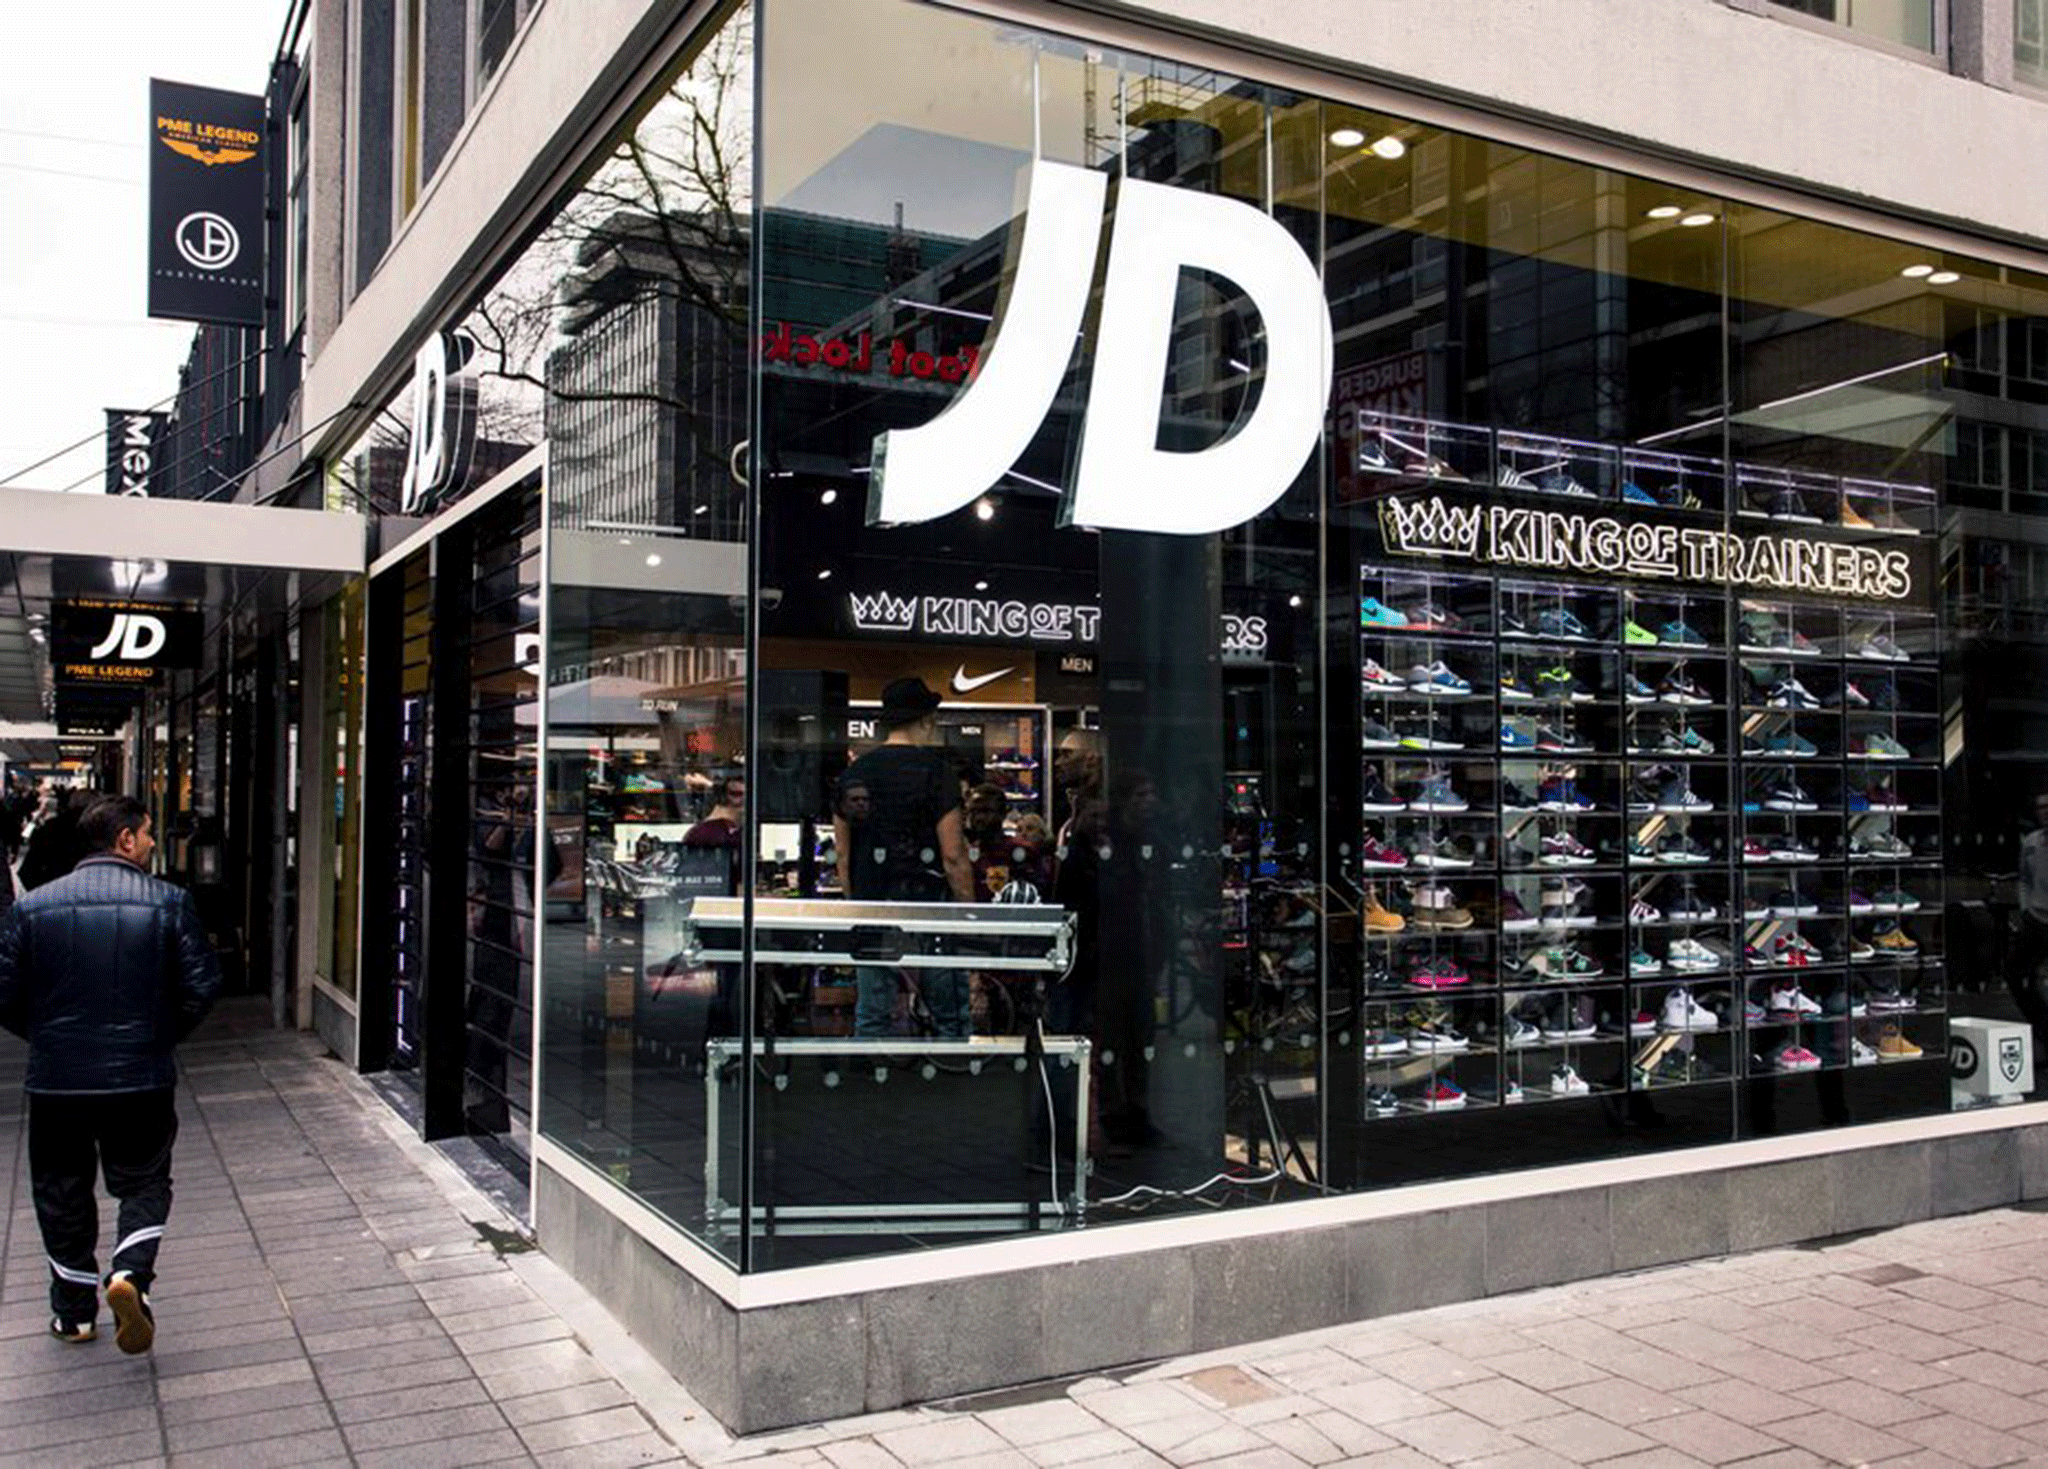 JD is living up to its boast of being the king of trainers